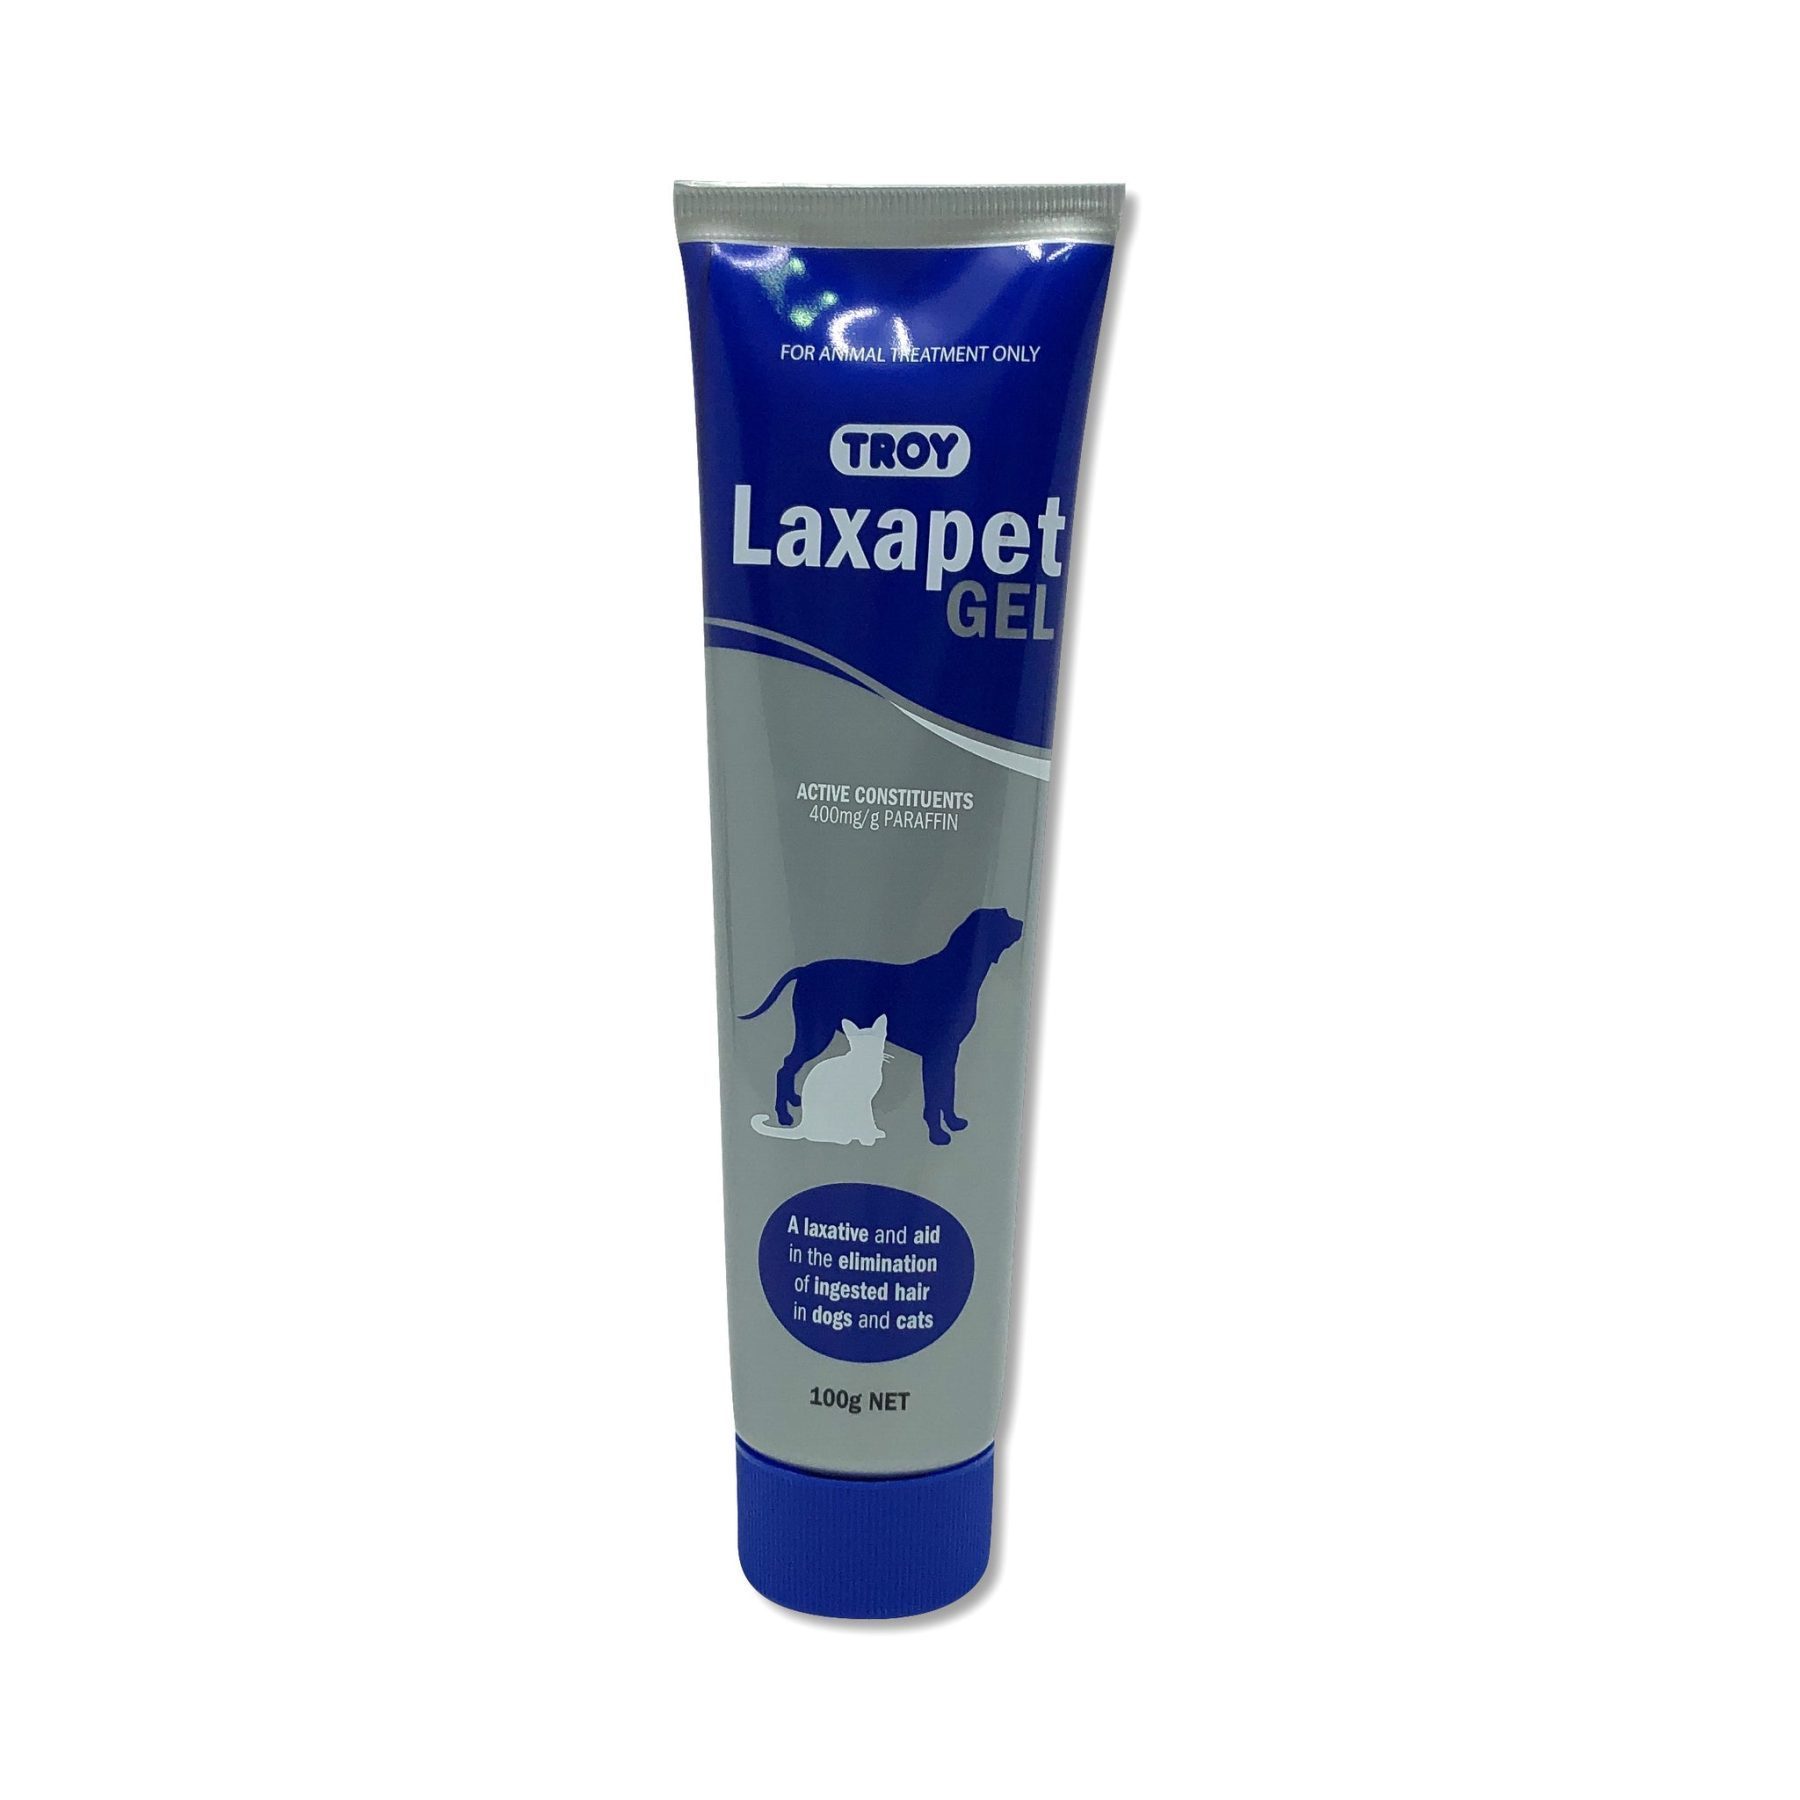 Laxapet is a palatable, mild laxative gel that aids ...